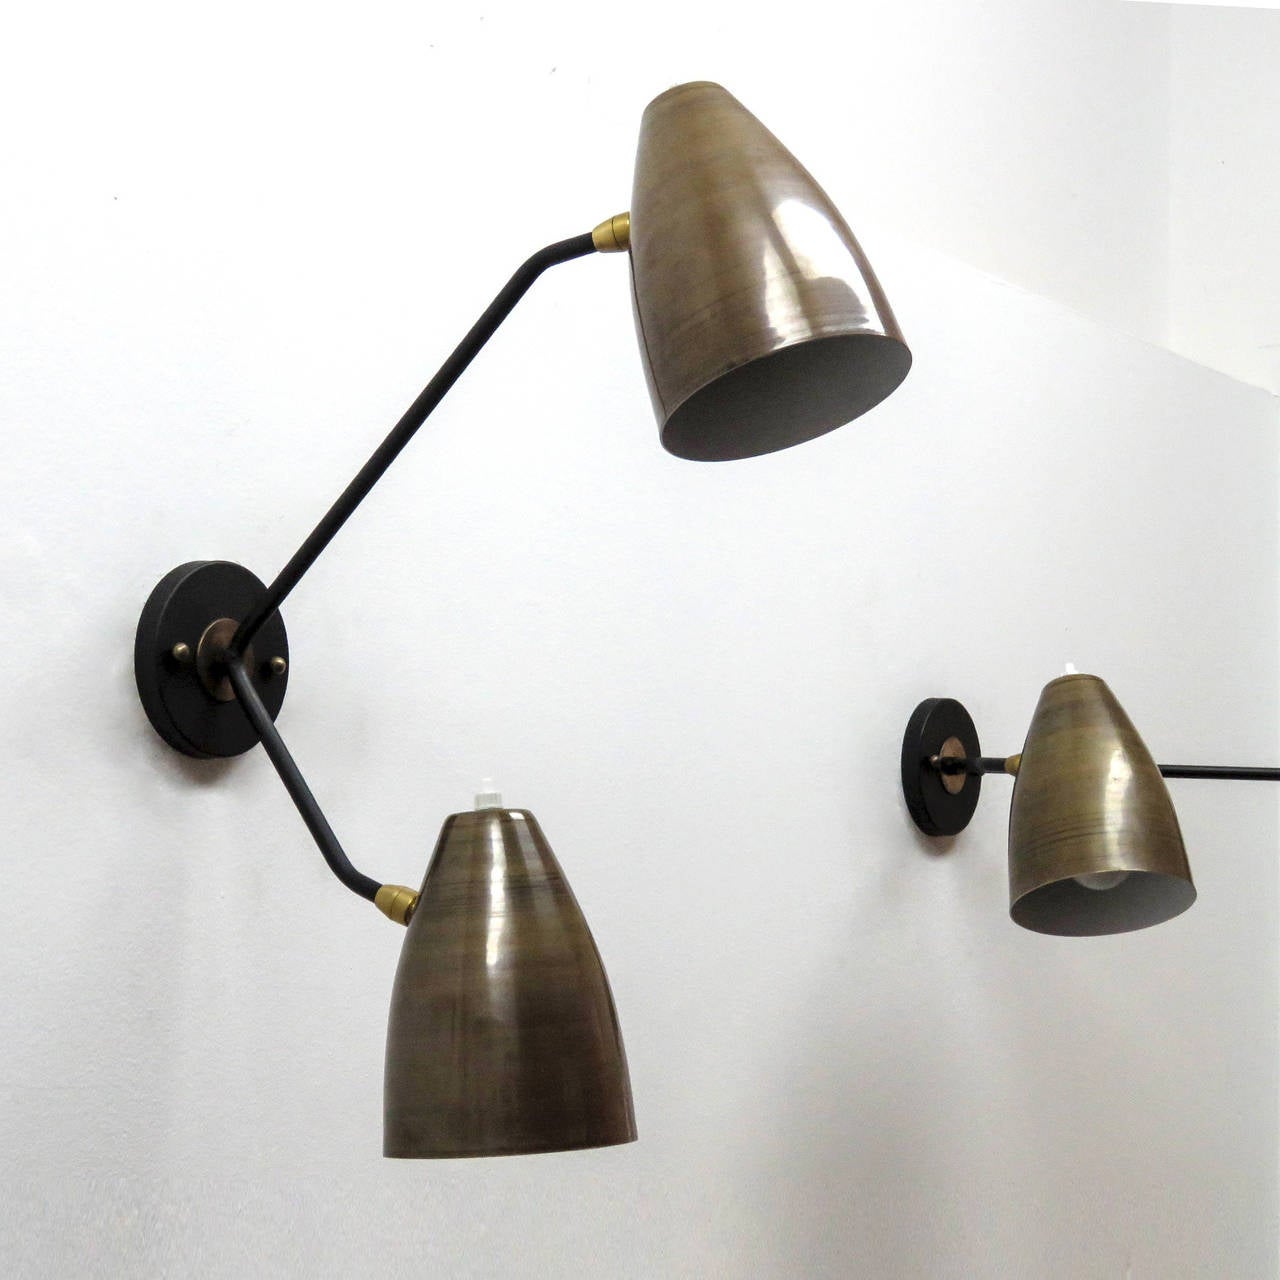 Wonderful asymmetrical double arm wall lights by Gallery L7, handcrafted and finished in Los Angeles with two fully adjustable raw brass shades with white enameled interiors on black enameled arms, can be mounted vertically or horizontally, each